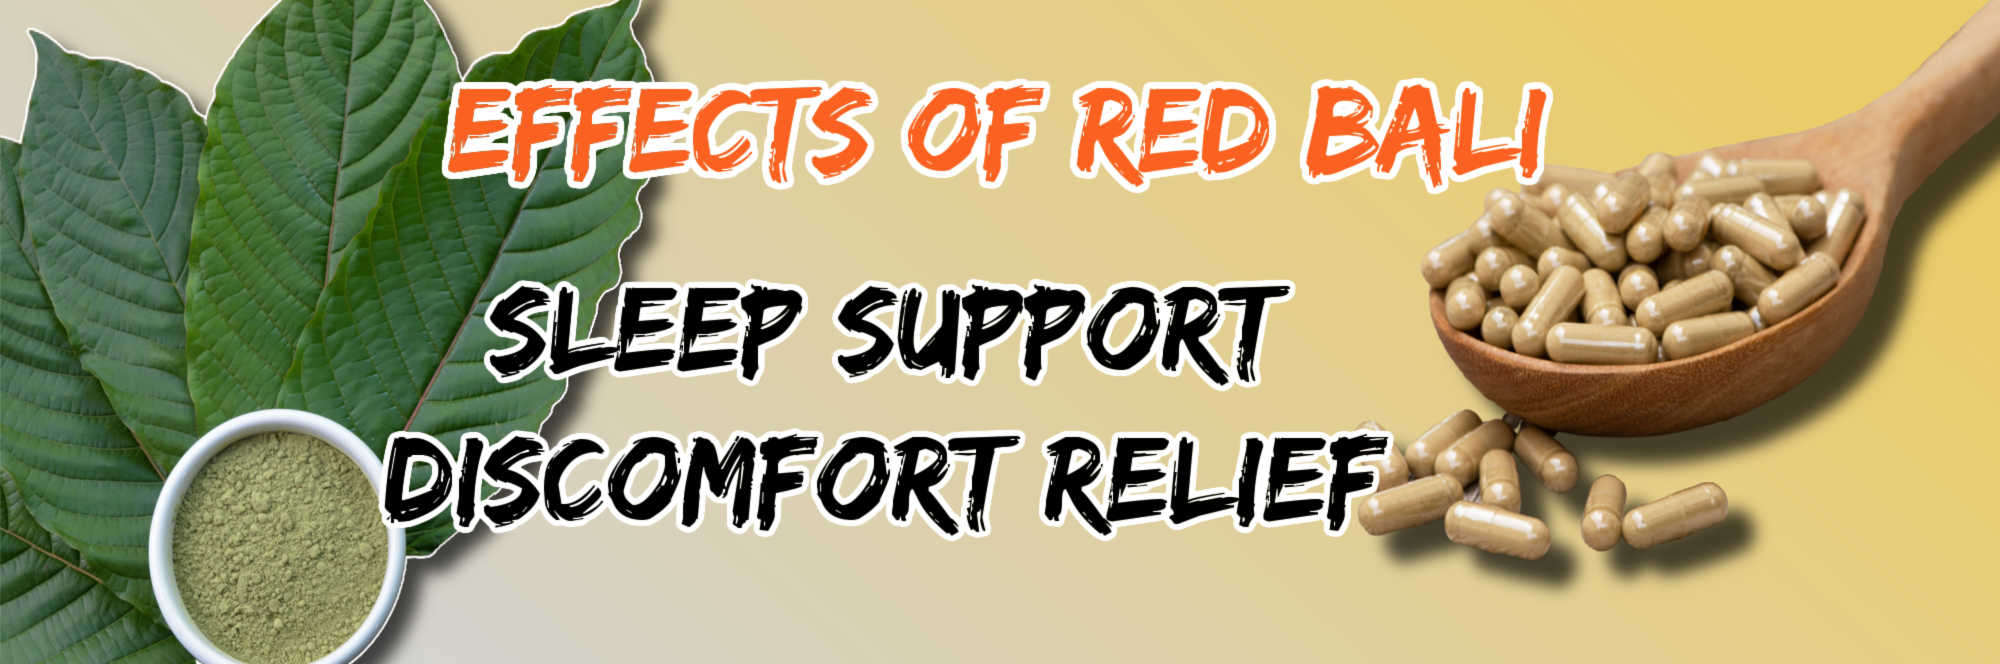 image of red bali effects